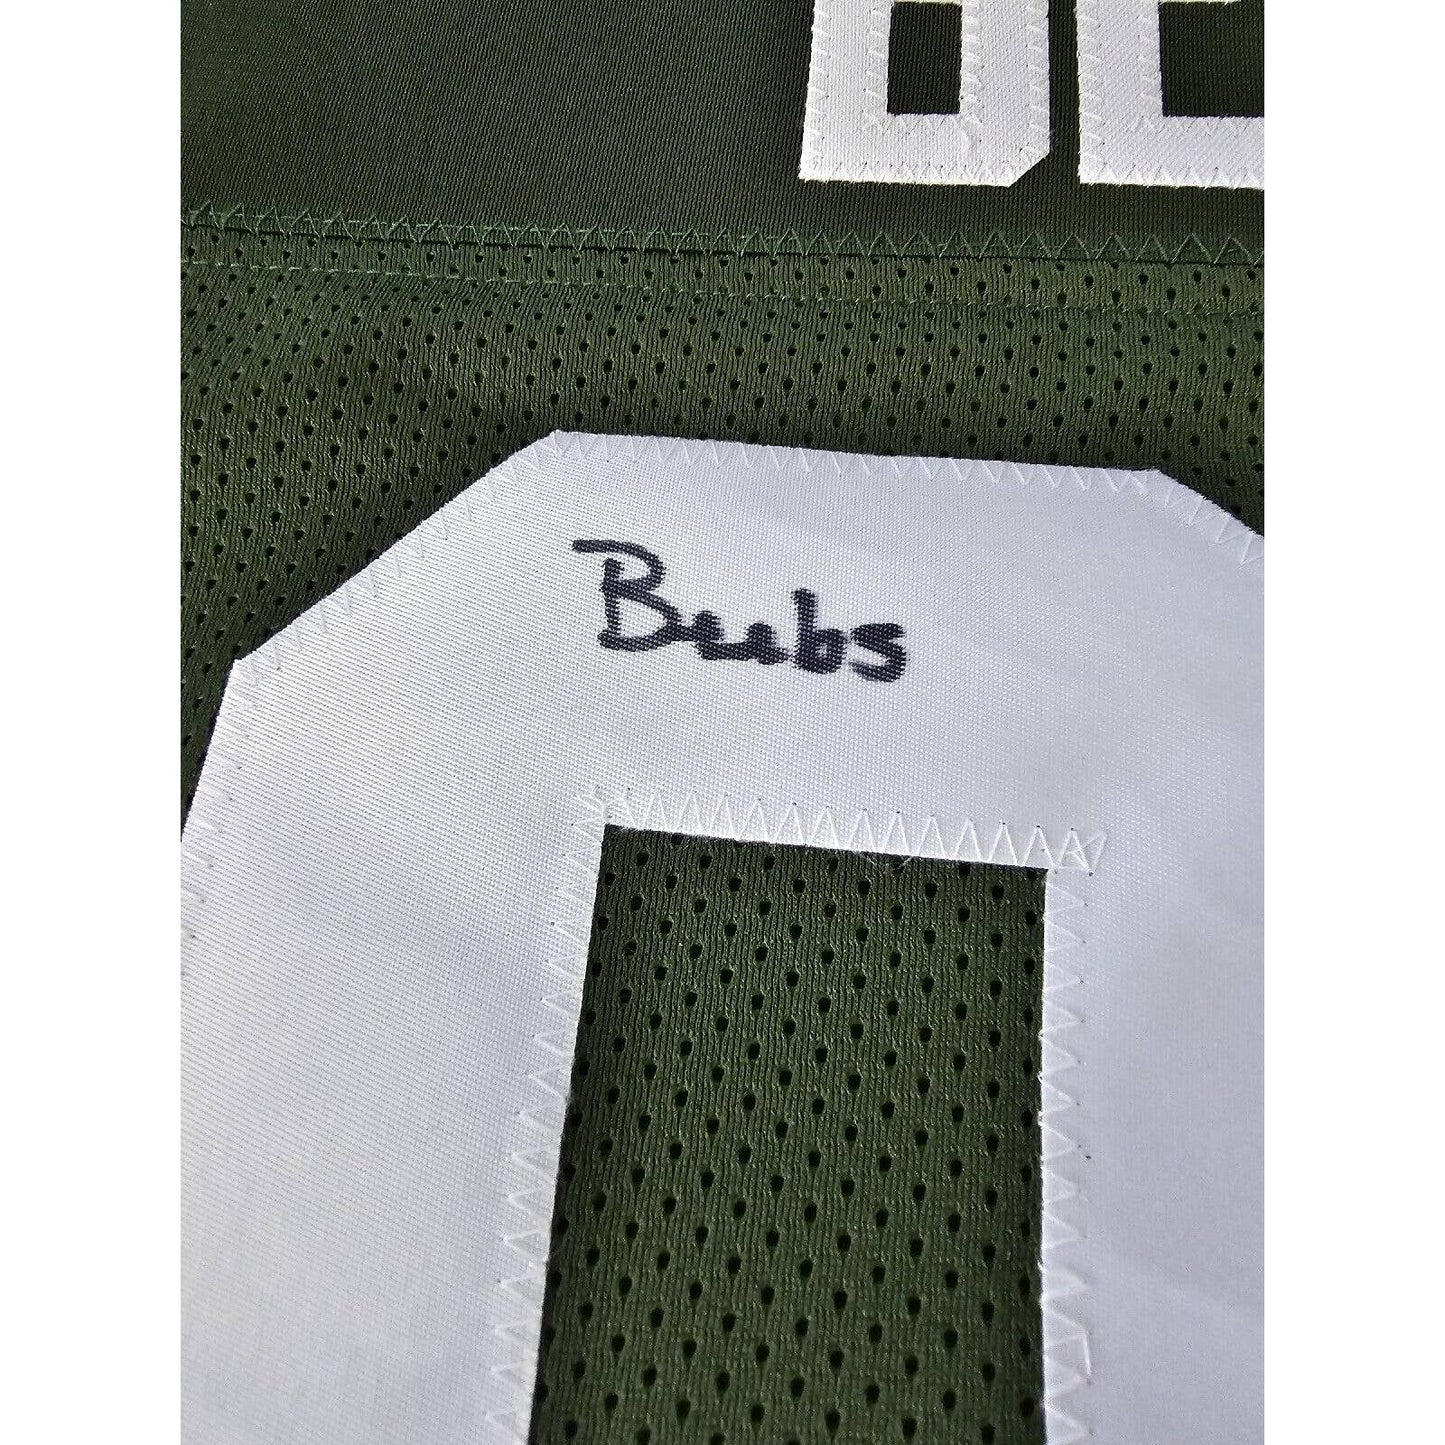 Don Beebe Autographed/Signed Jersey JSA Sticker Green Bay Packers SB Champ